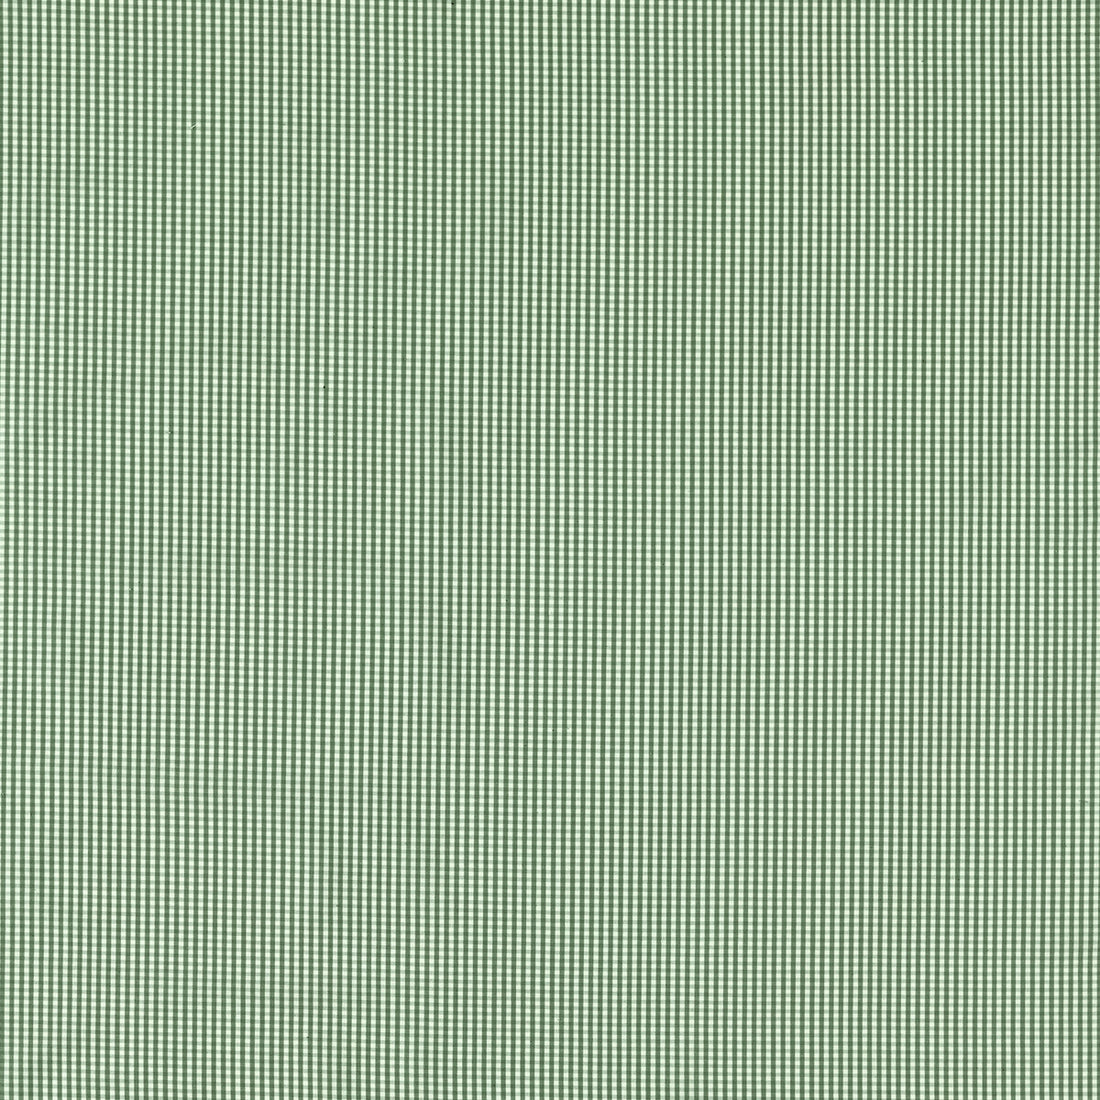 Windsor fabric in racing green color - pattern F1505/08.CAC.0 - by Clarke And Clarke in the Clarke &amp; Clarke Edgeworth collection